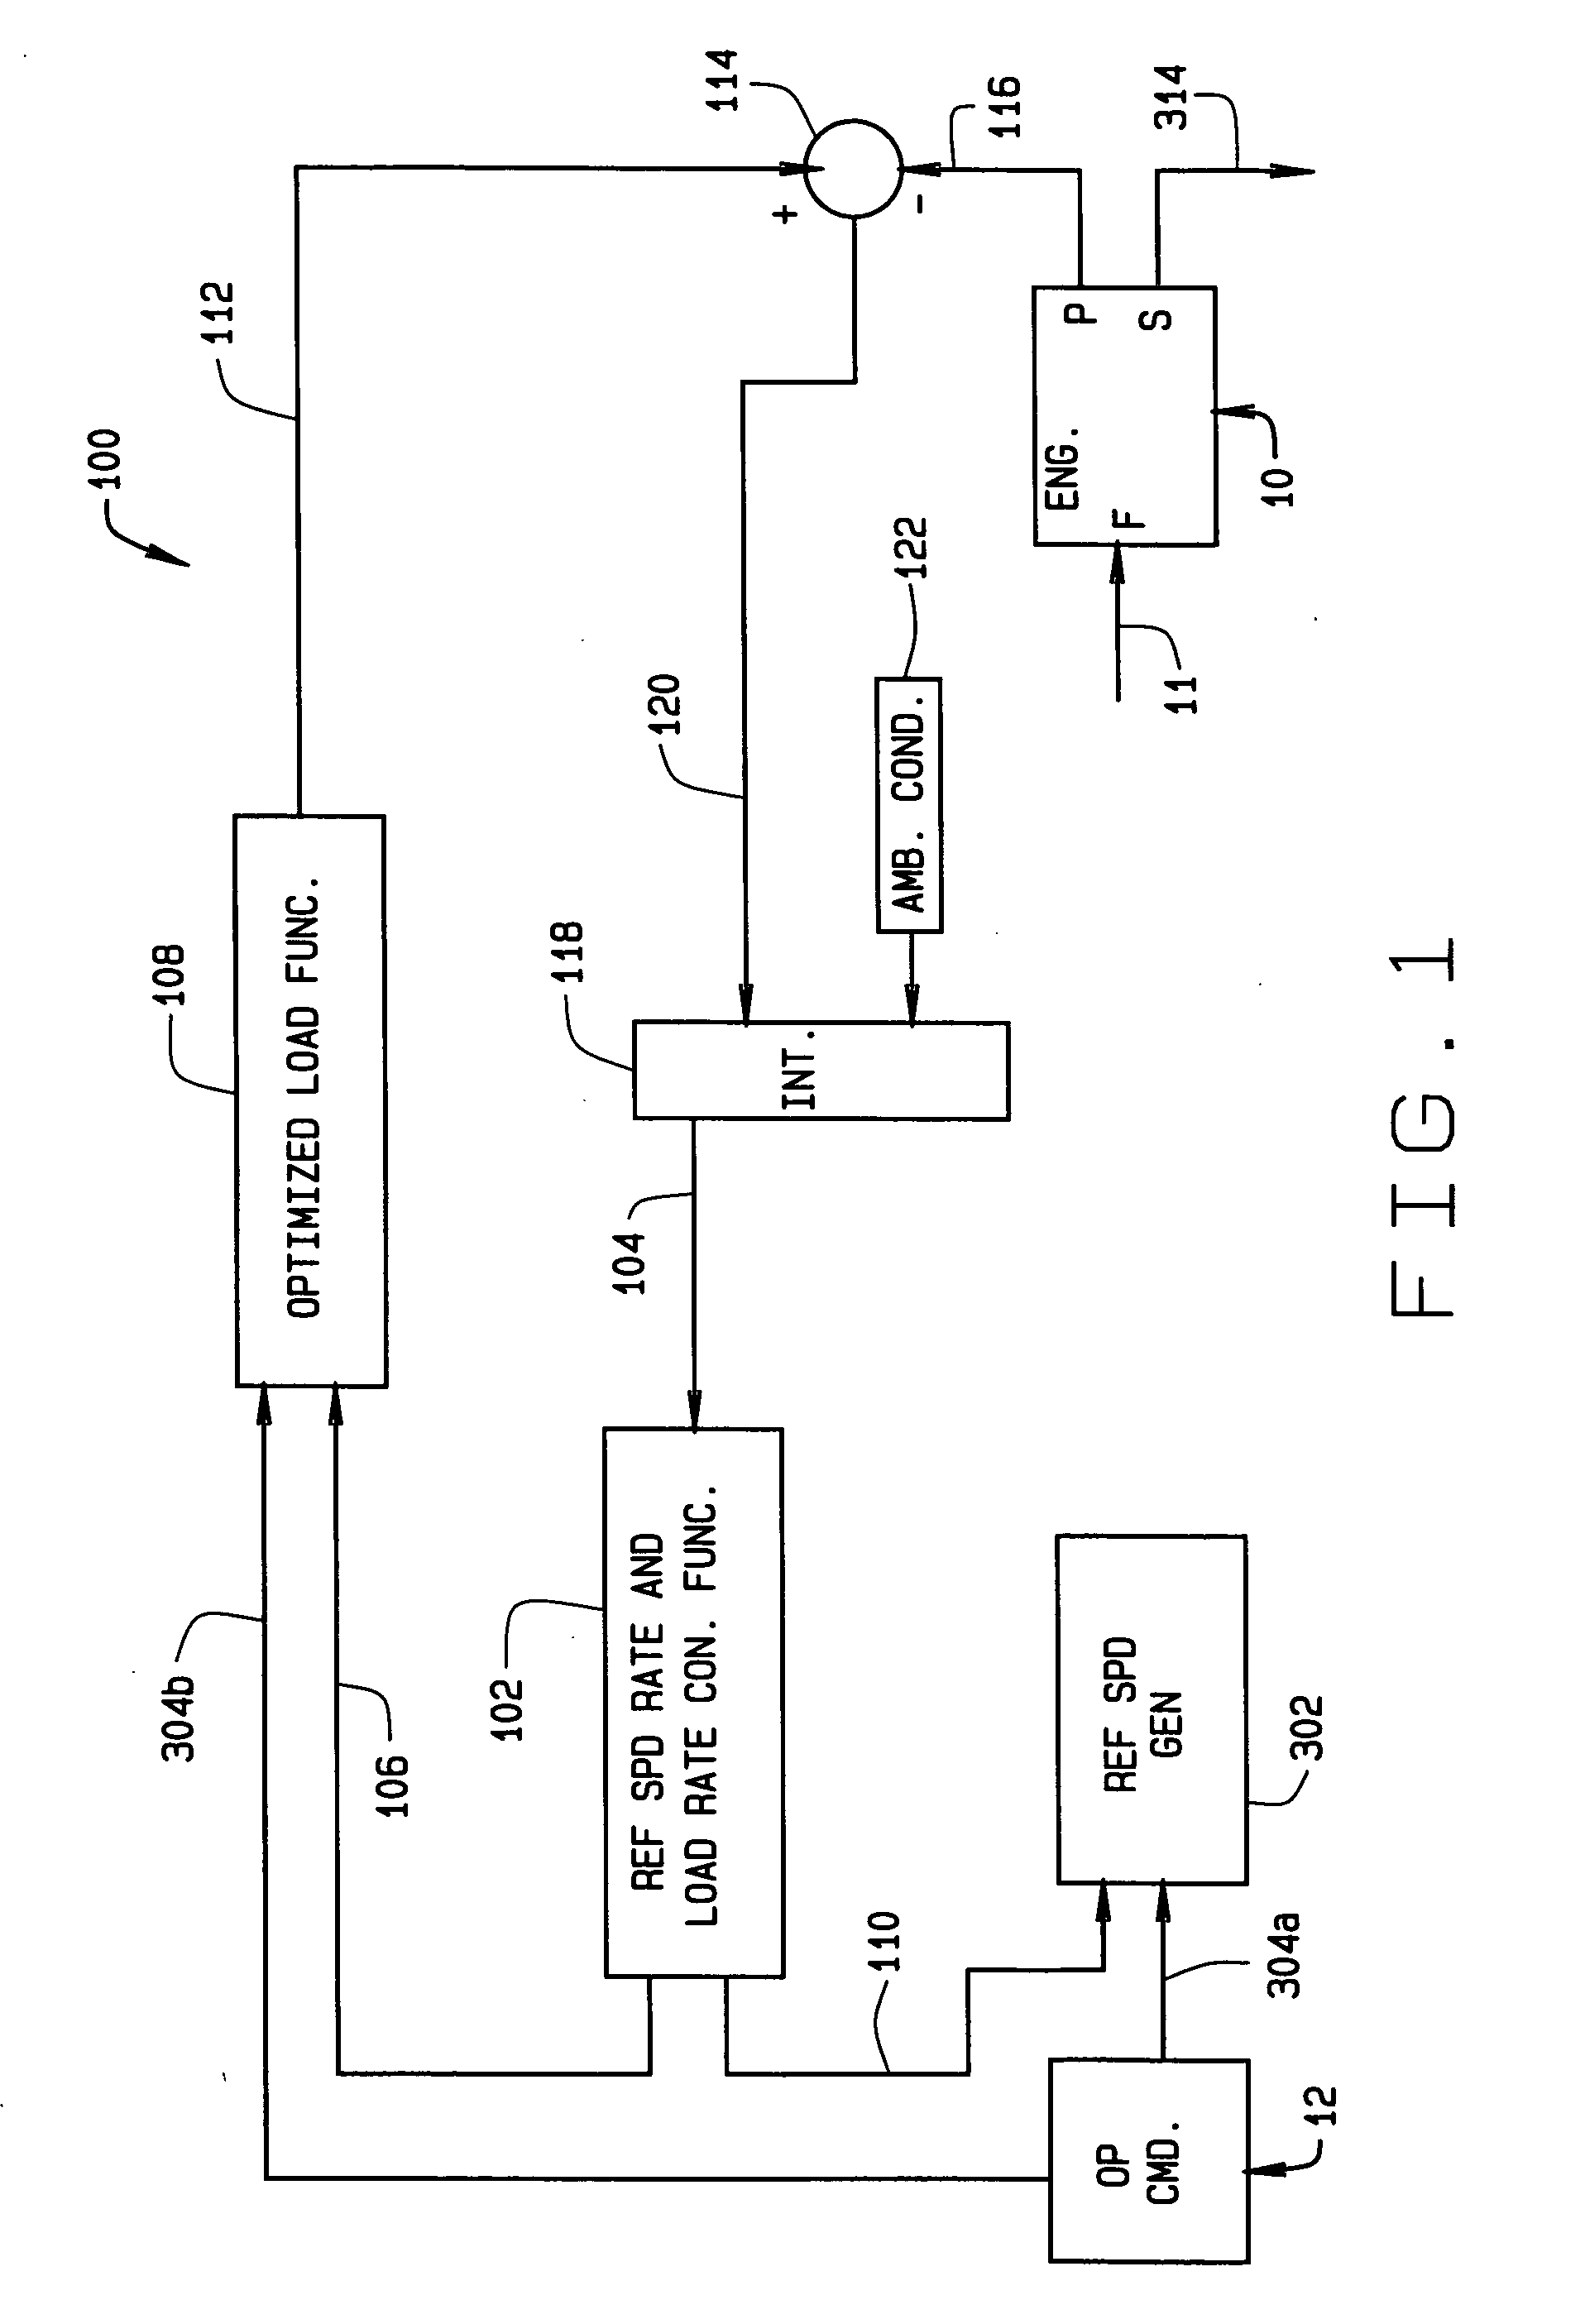 Diesel engine control system with optimized fuel delivery